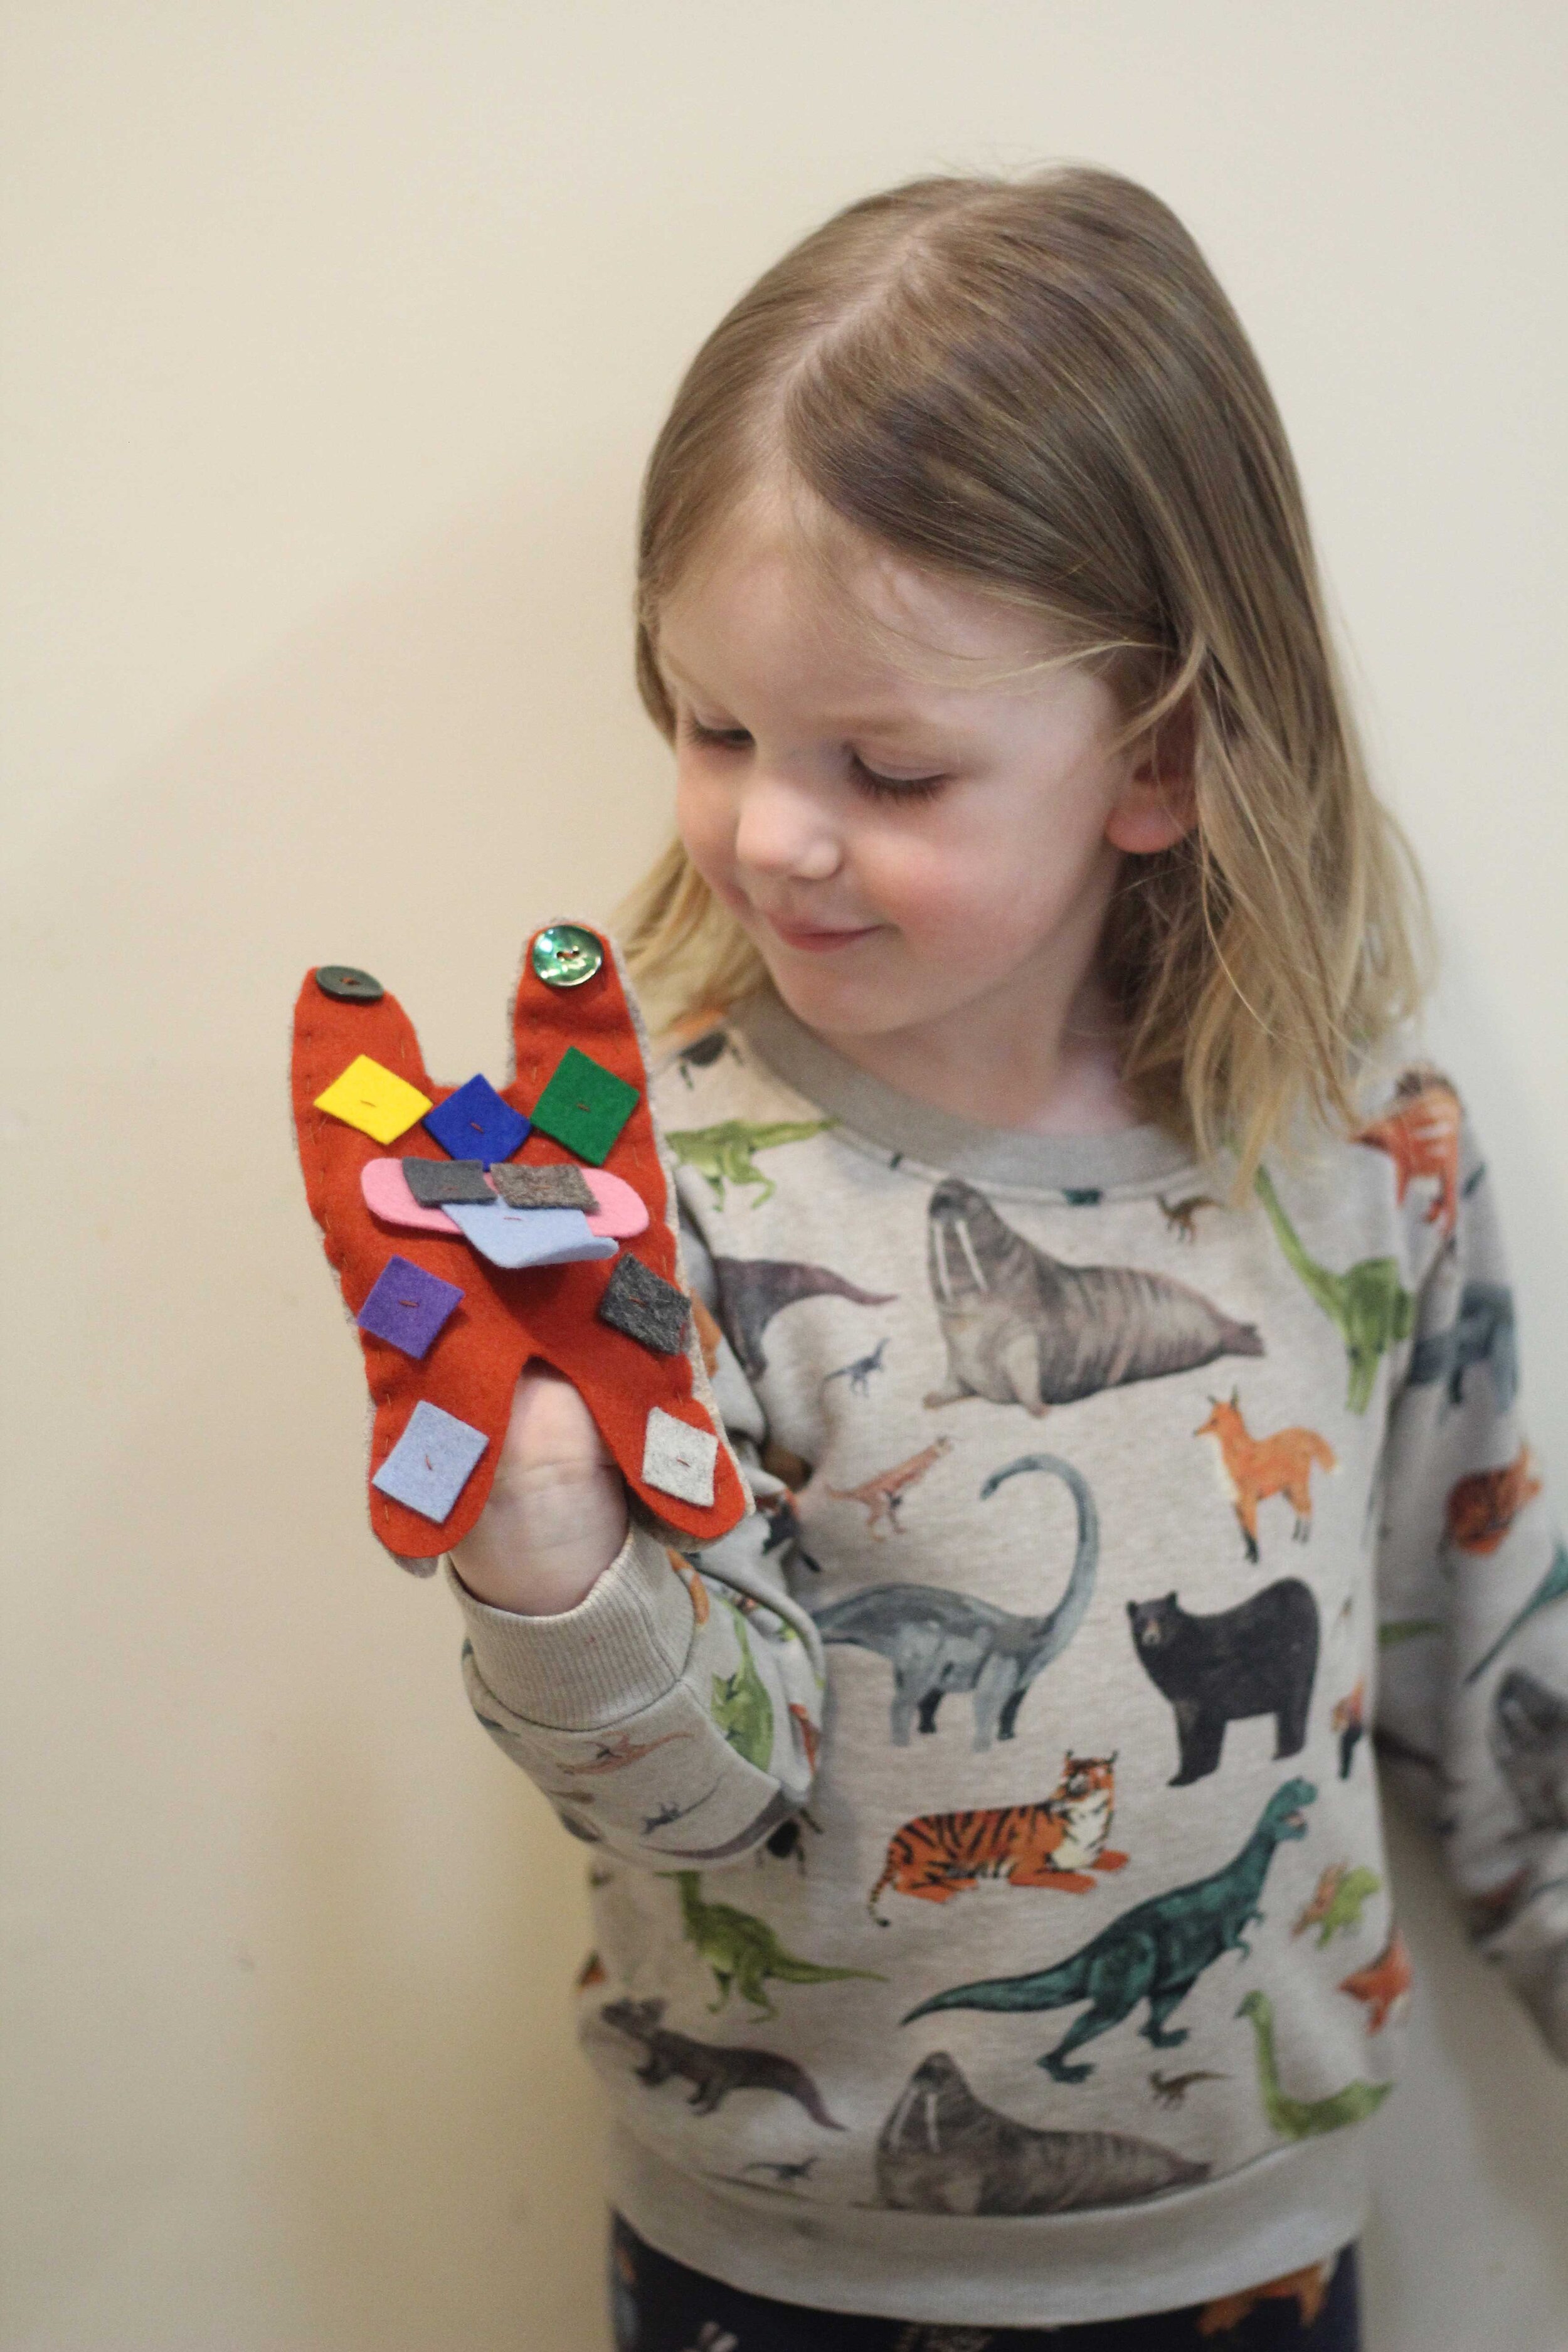 ‘TJ’ the Felt Monster Puppet by Ola Thompson age 3